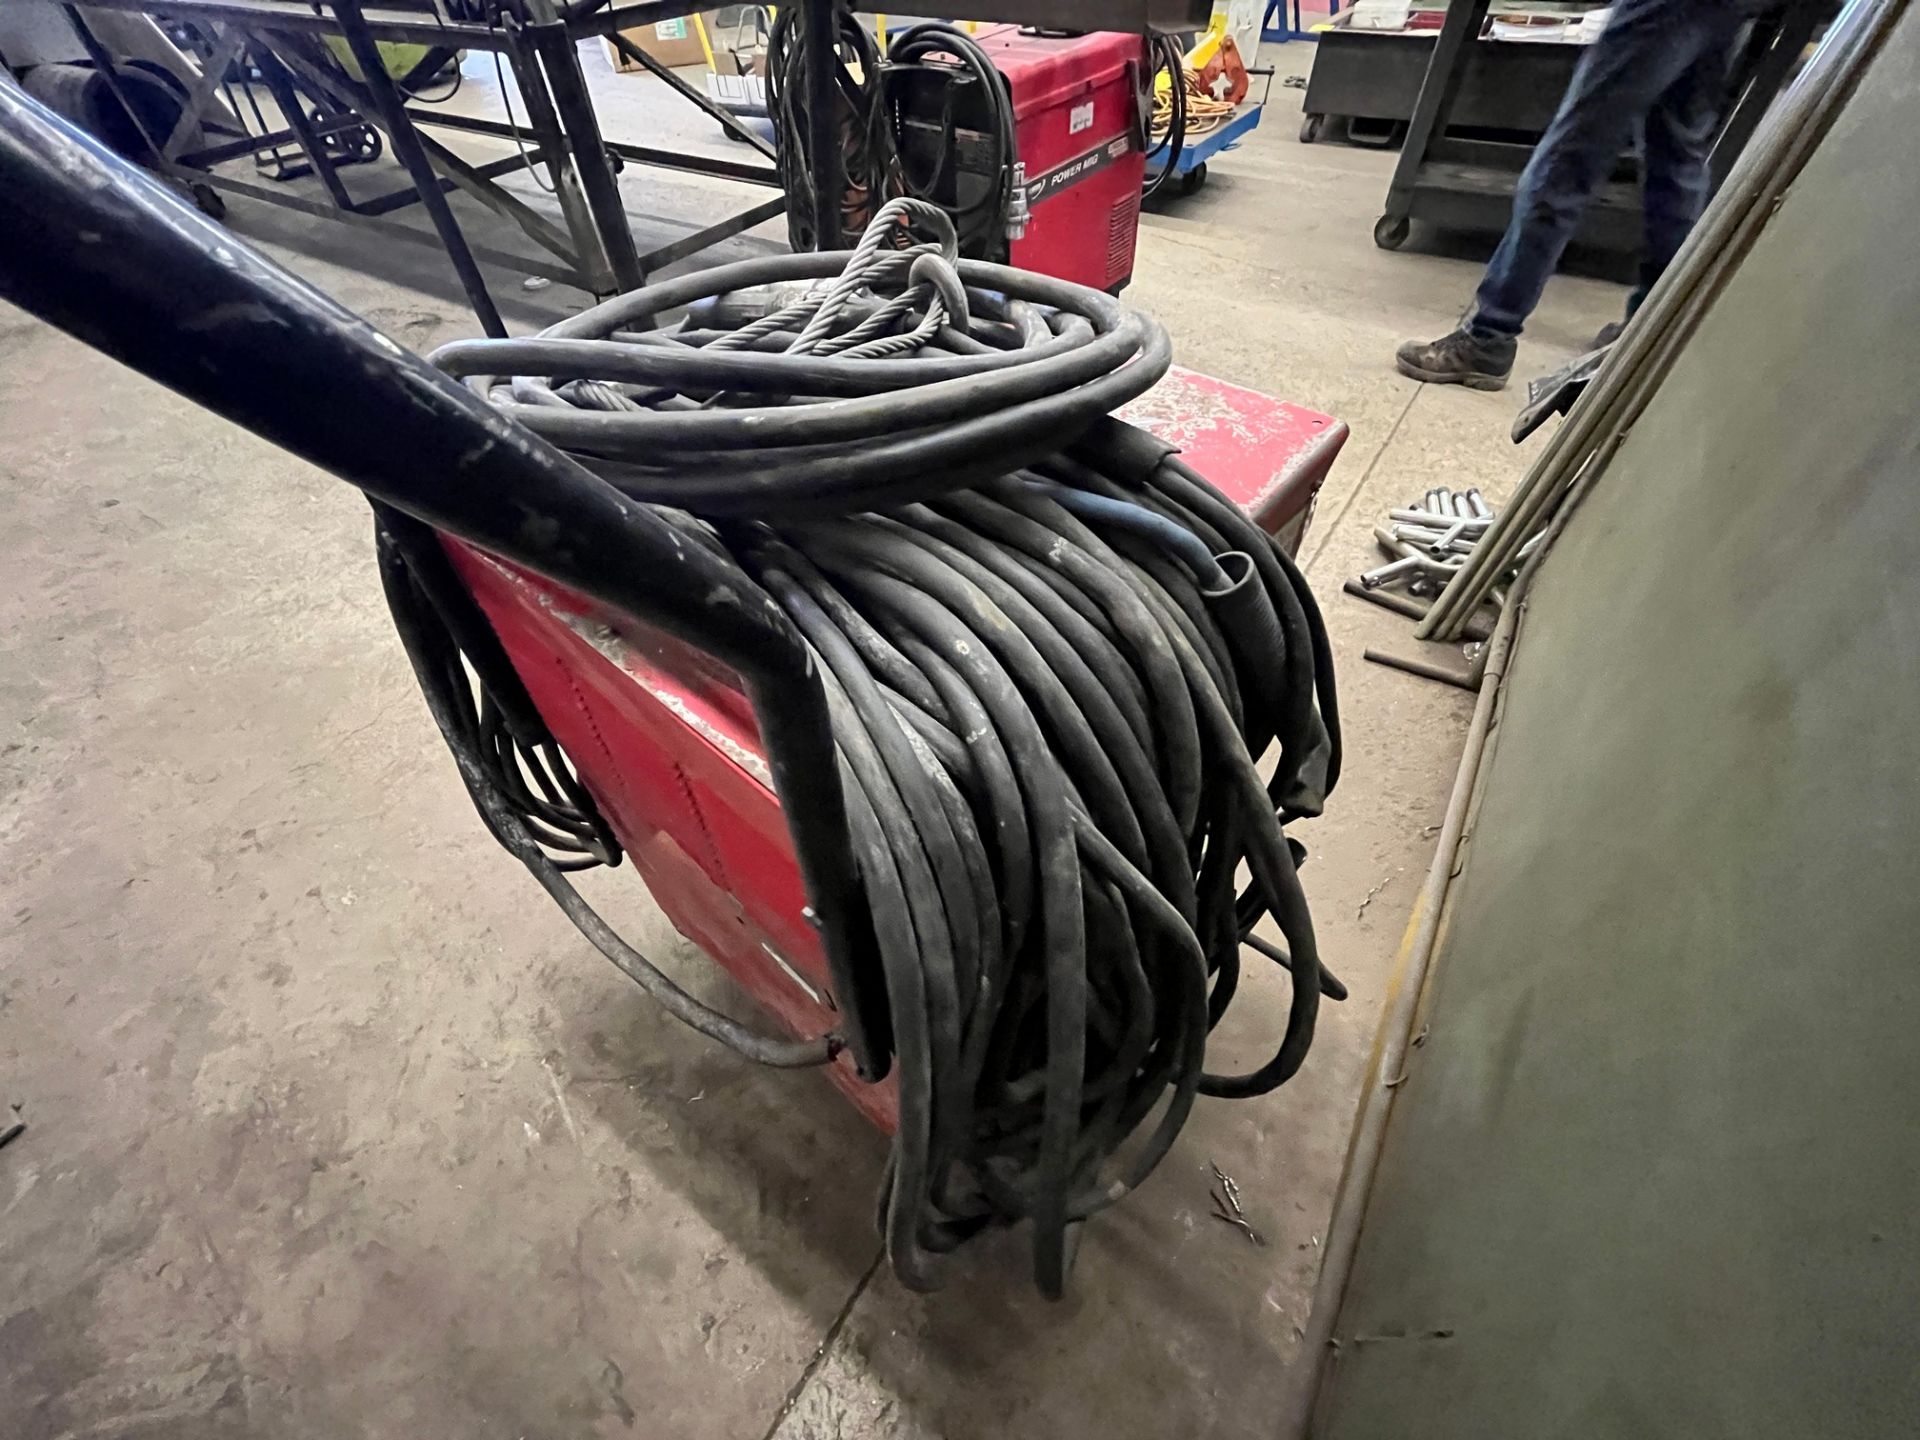 LINCOLN ELECTRIC IDEAL ARC 250 MIG WELDER W/ CART, CABLES (NO TANKS) - Image 6 of 6